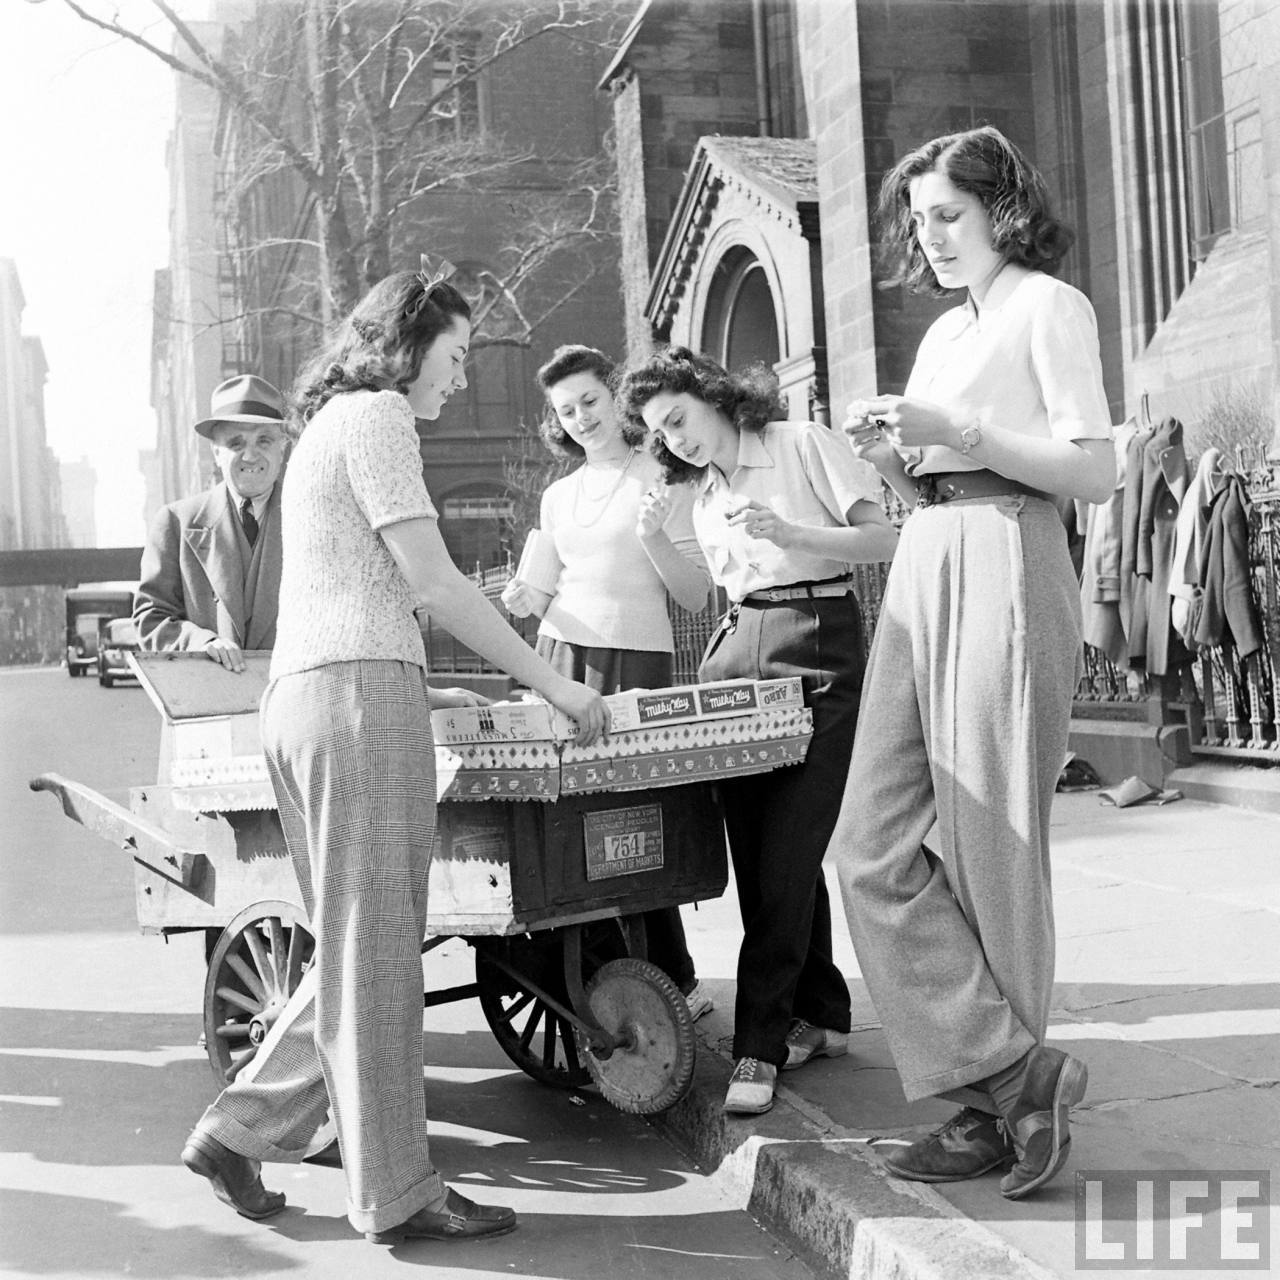 Vintage Photos of College Girls in Slacks in the 1940s | Vintage News Daily